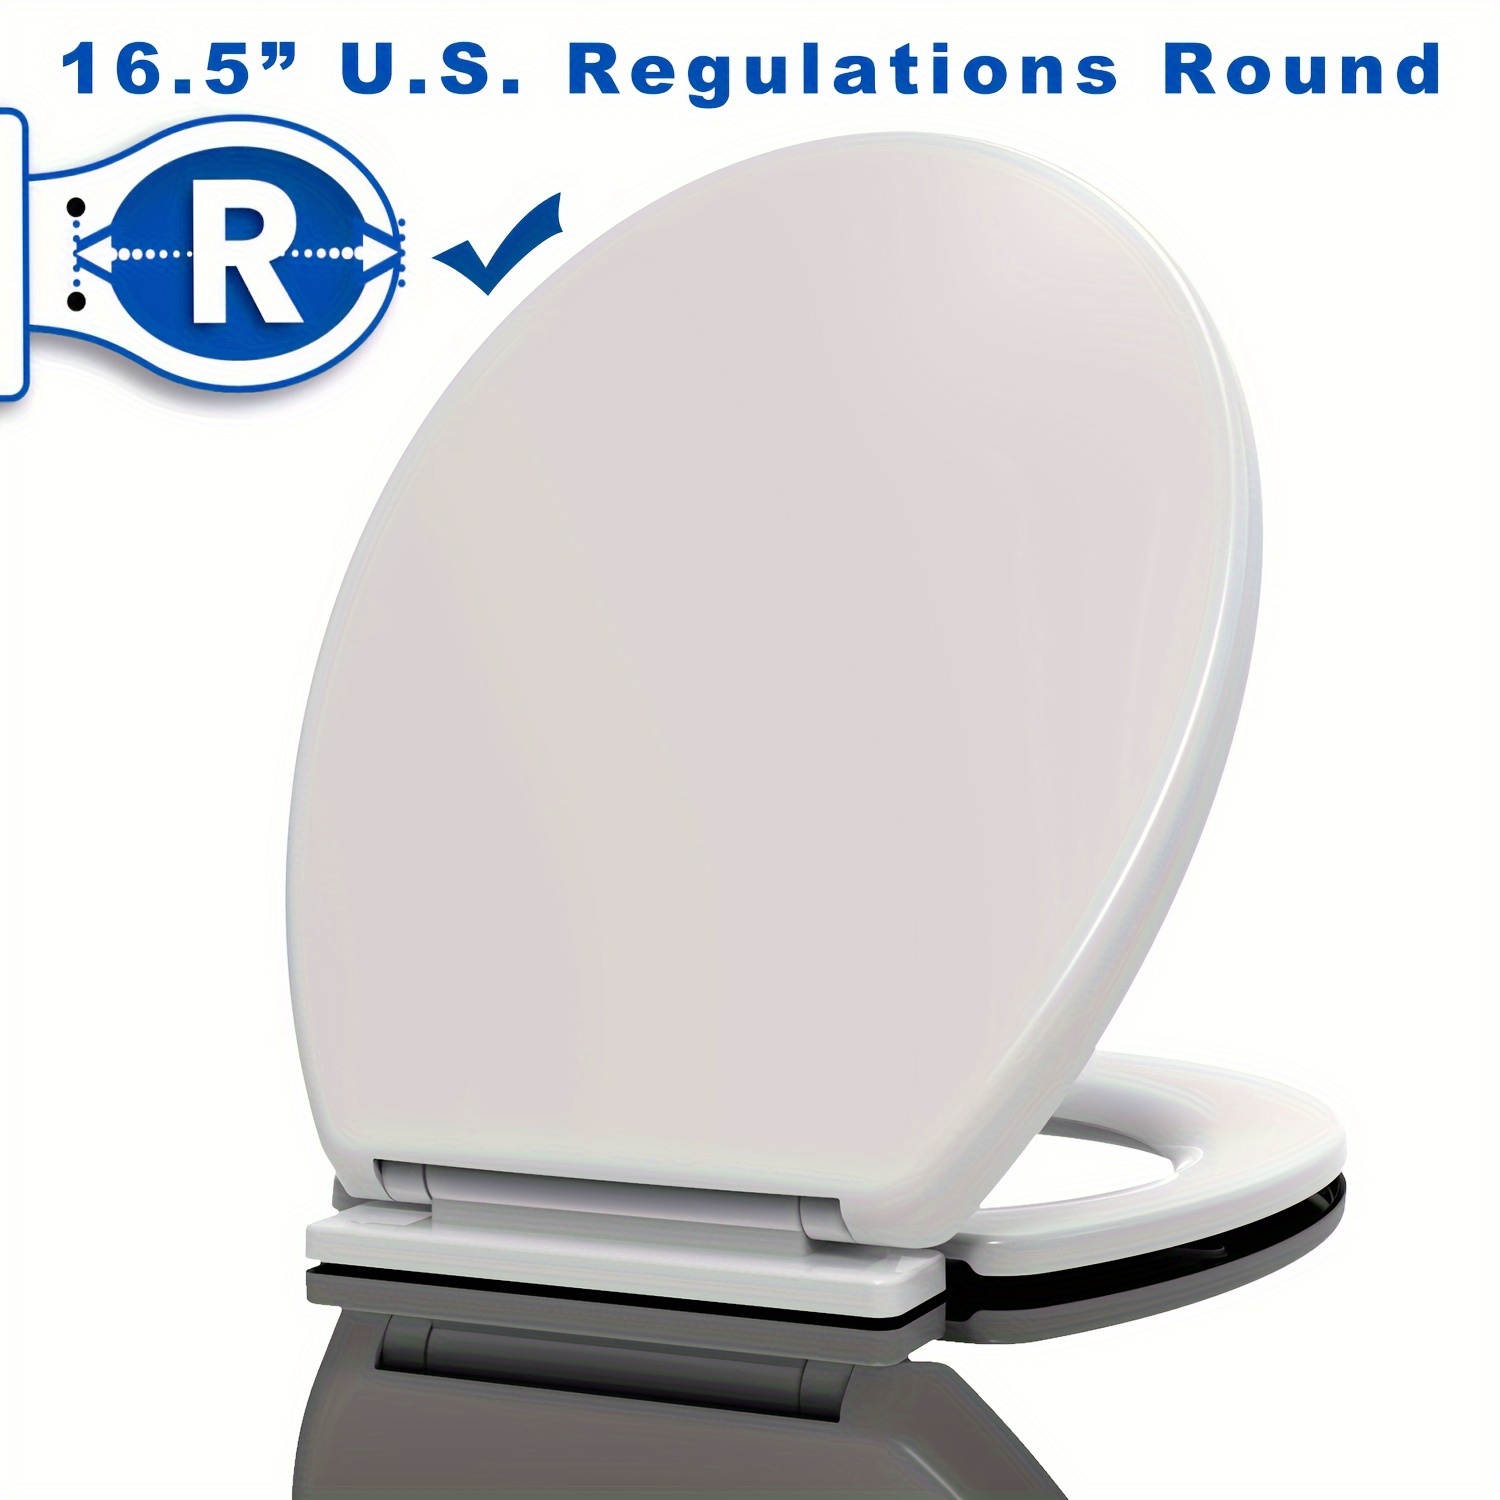 

1pc U.s. Regulations Round Toilet Seat Replacement Slow-close, Removable Adjusterable Toliet Seat, That Will Never Loosen